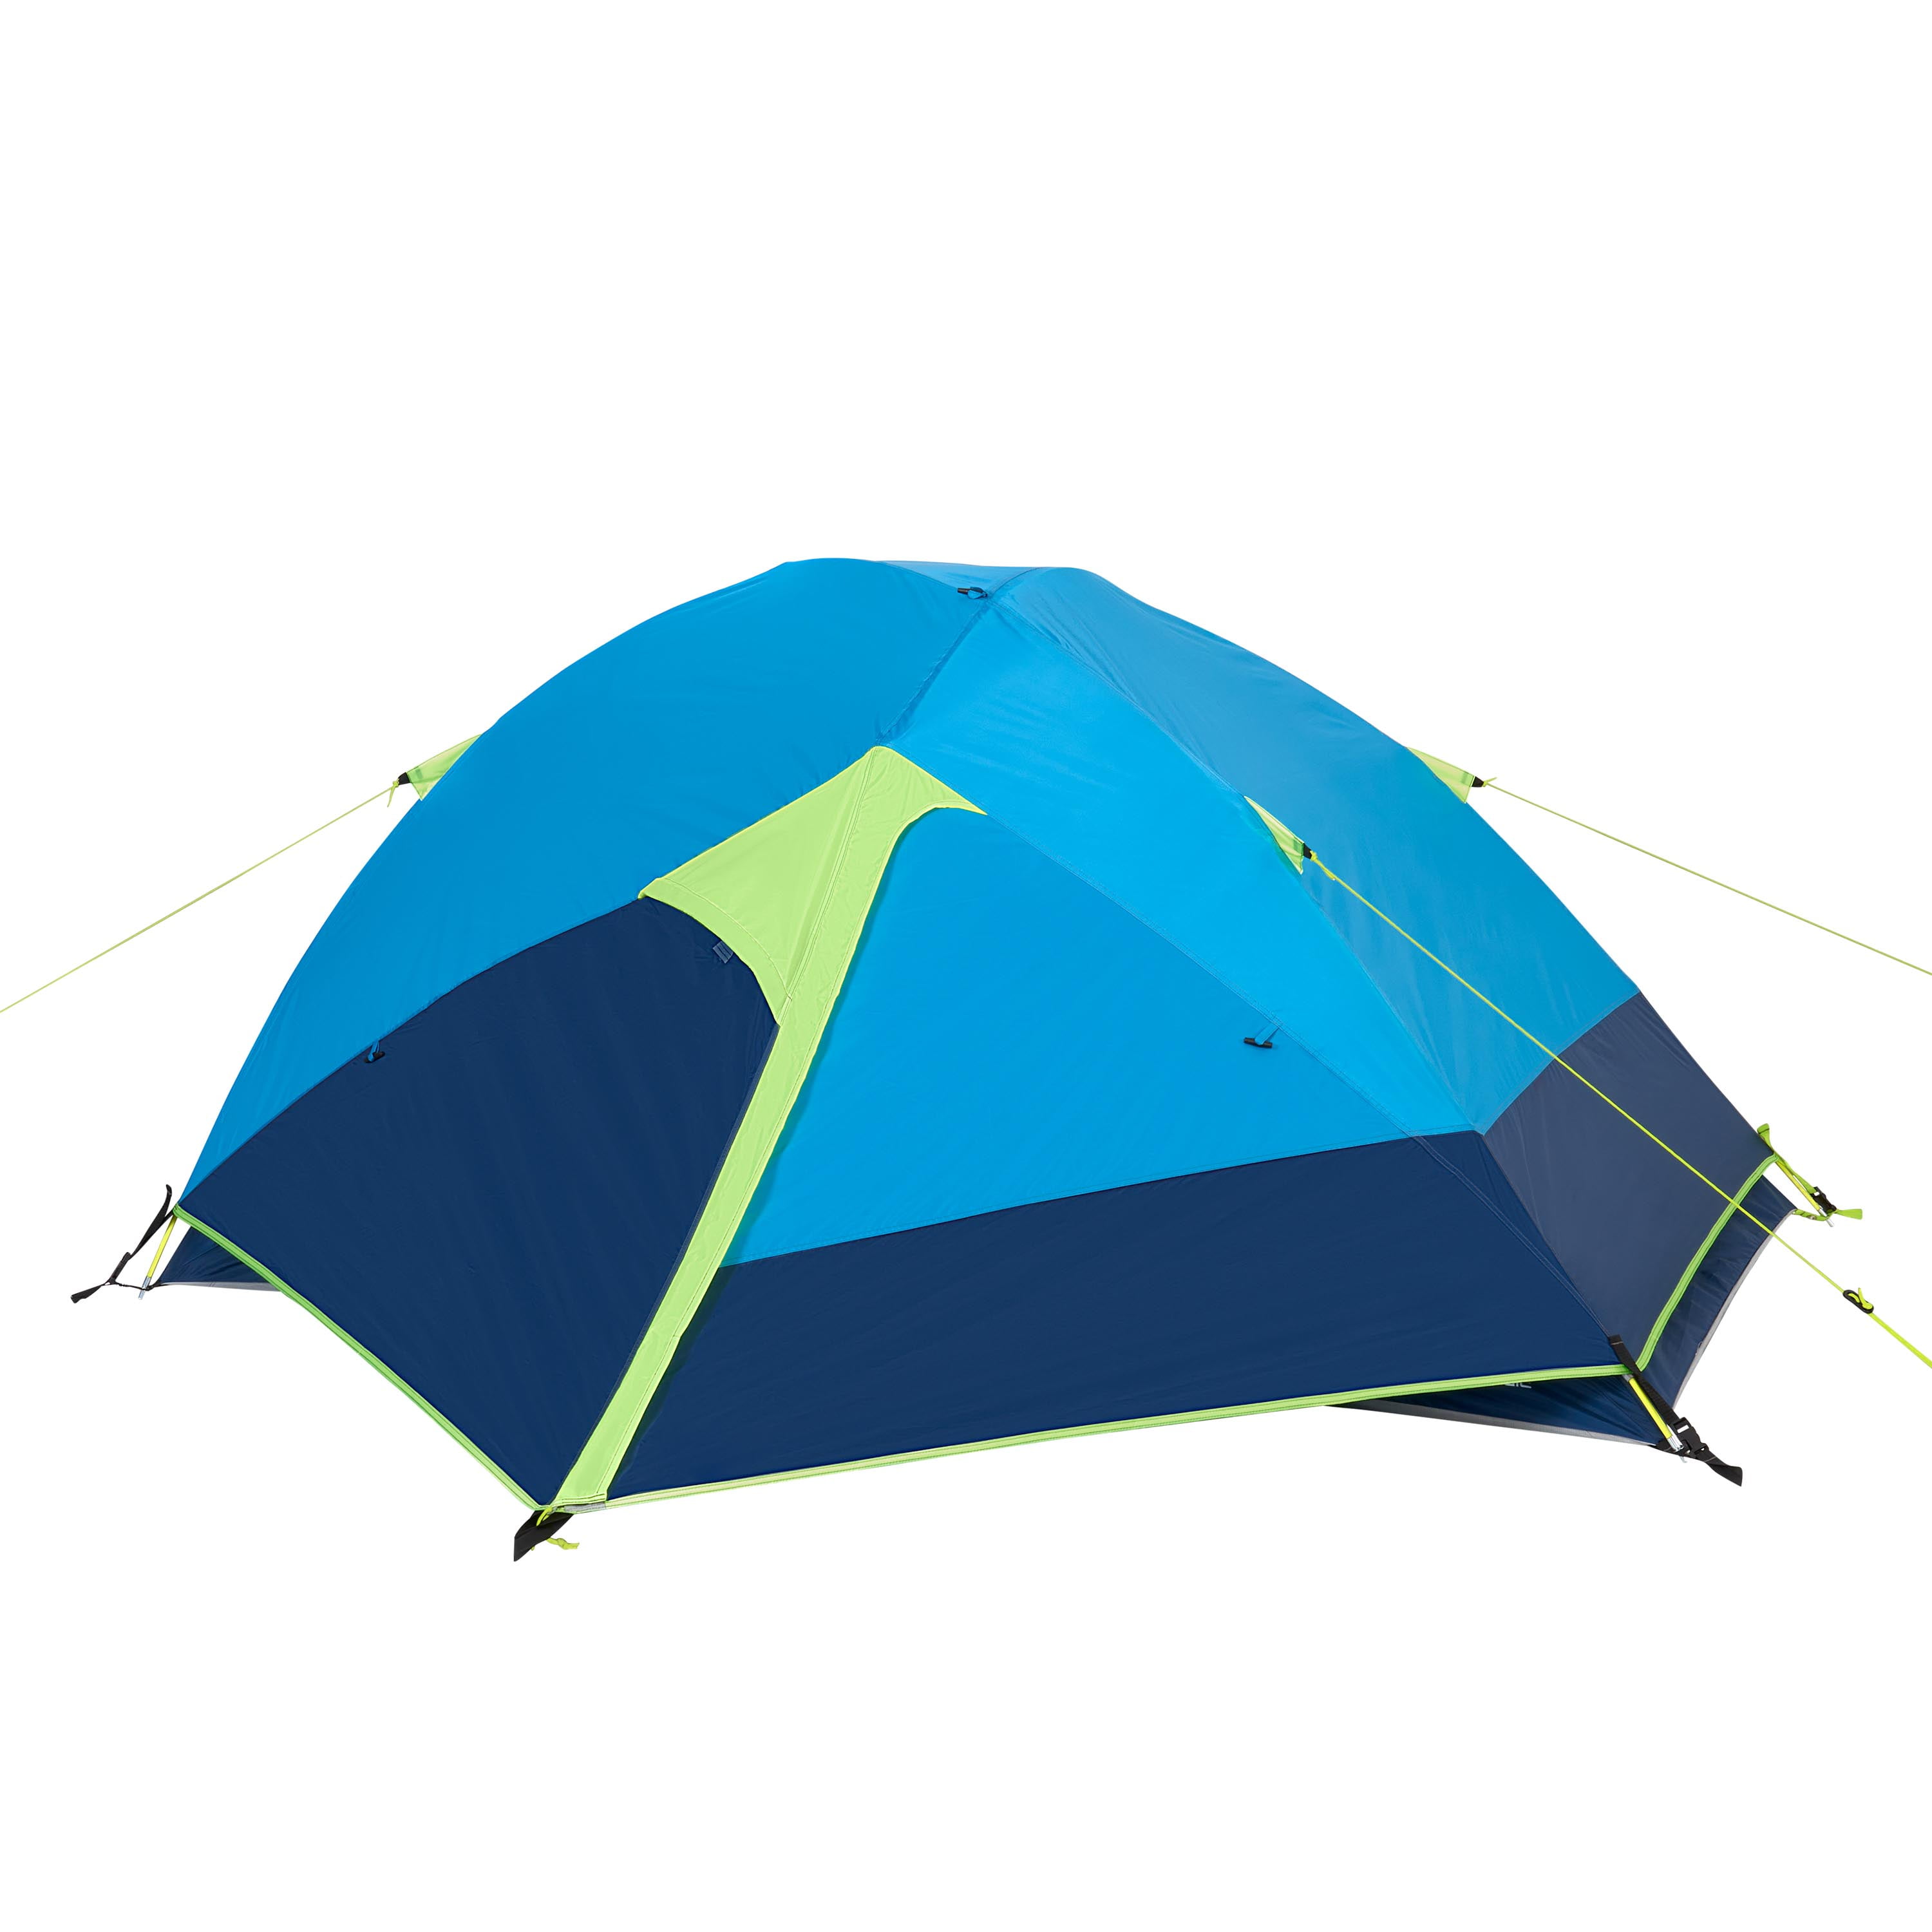 Ozark Trail 2-Person Backpacking Tent